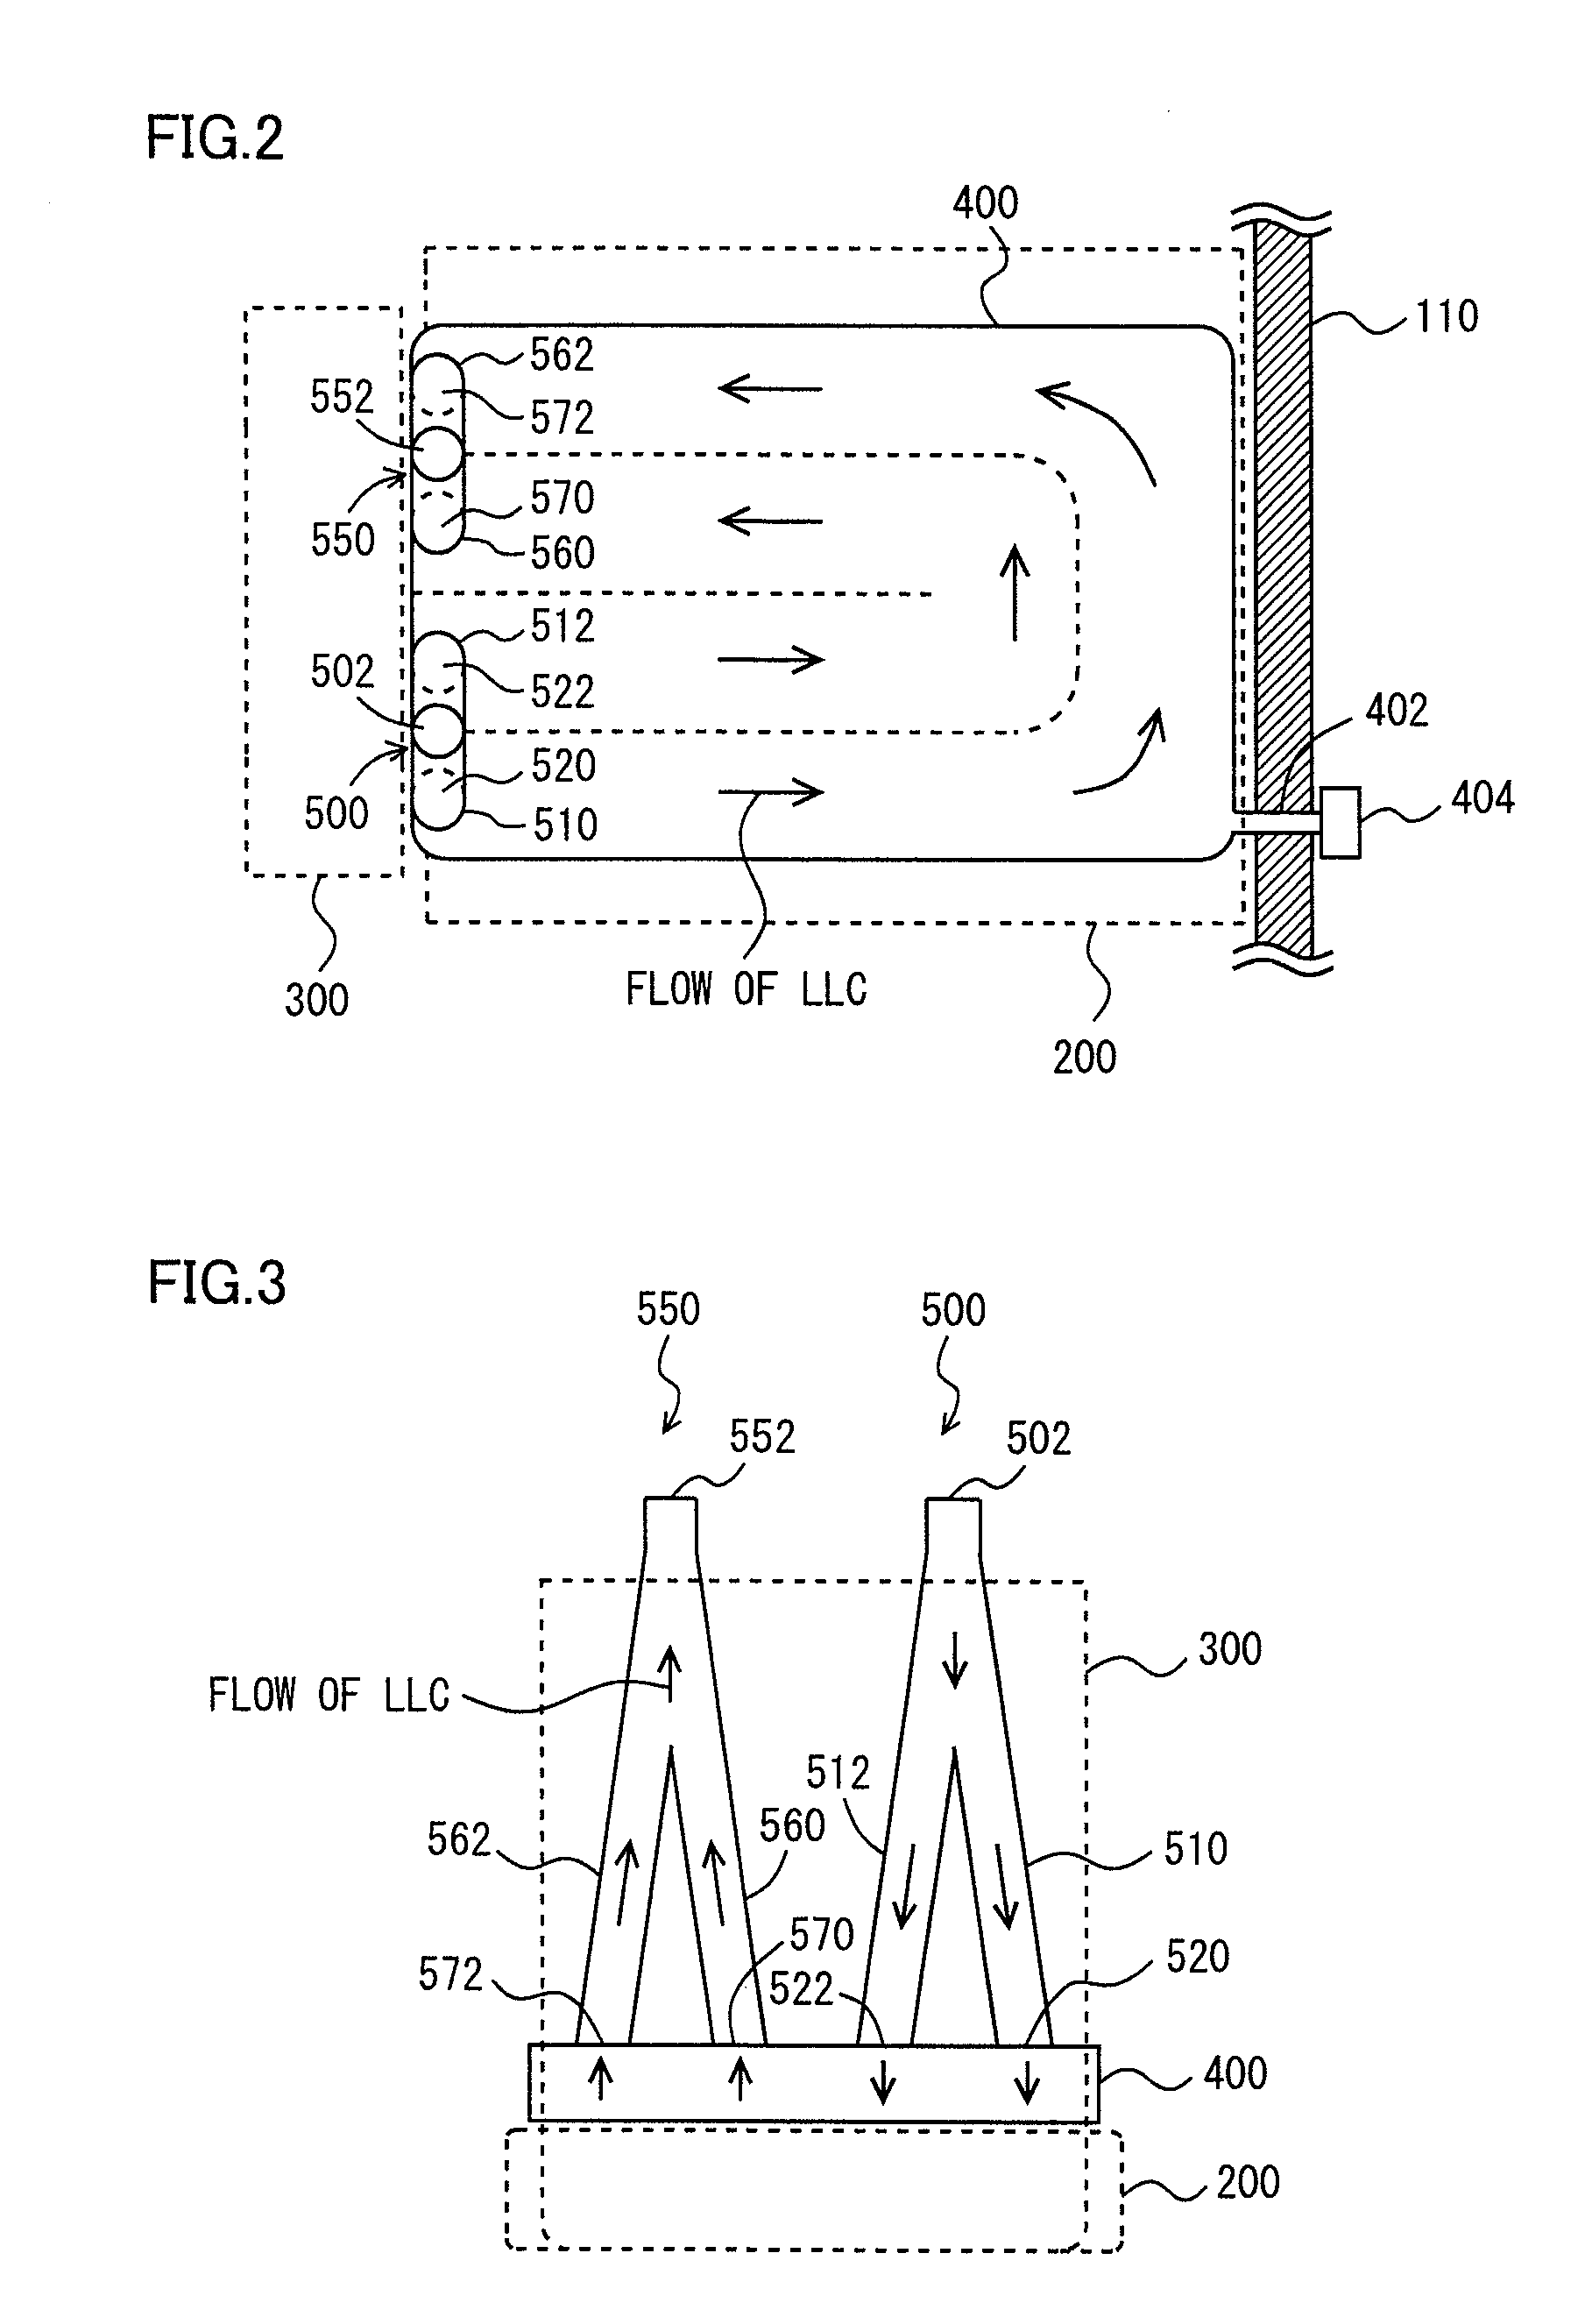 Cooling structure for inverter and capacitor accommodated integrally with motor in housing of motor, motor unit with cooling structure, and housing